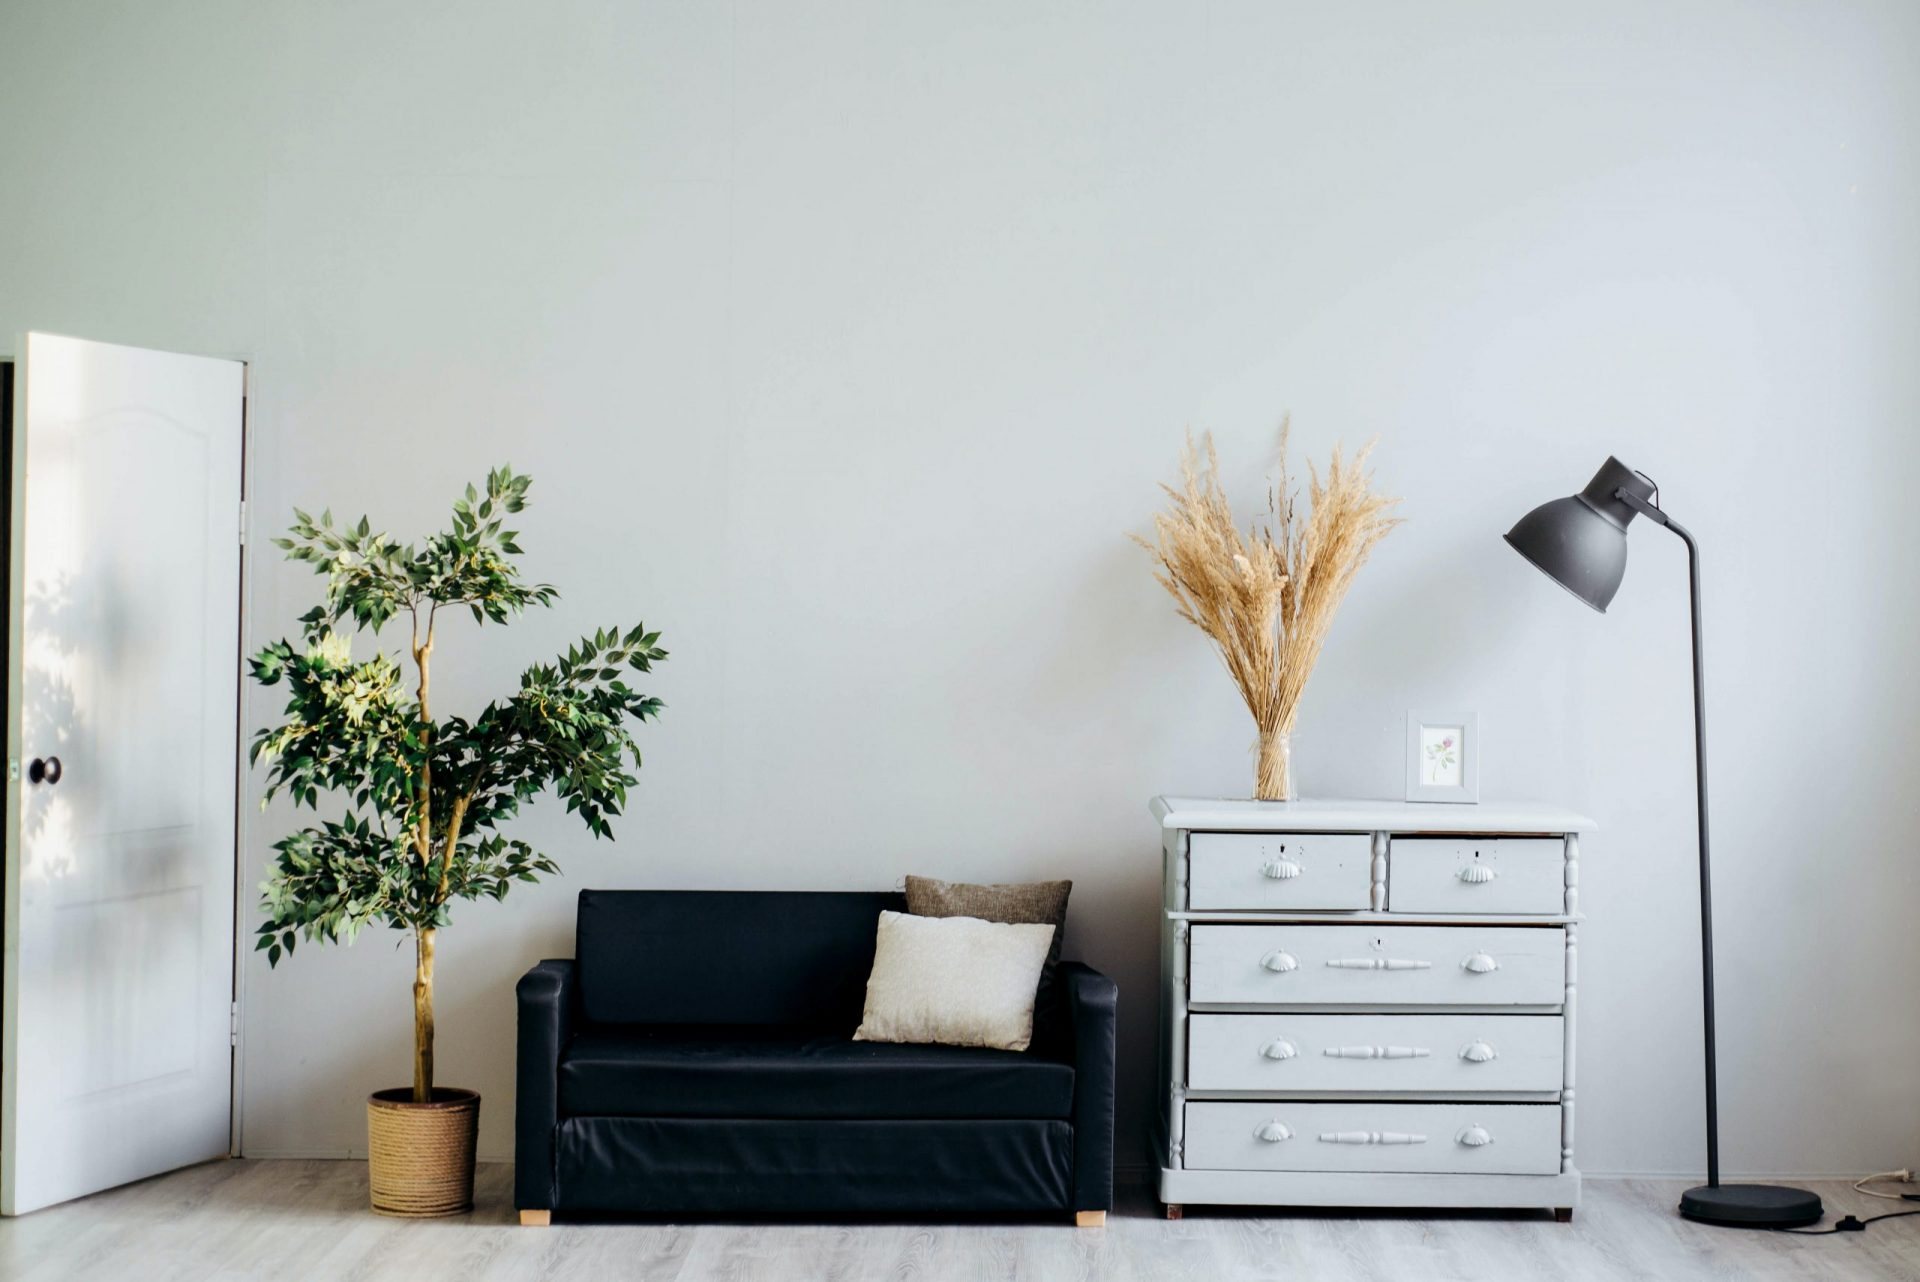 Student Home Decor: 7 Ways To Make Your House A Home